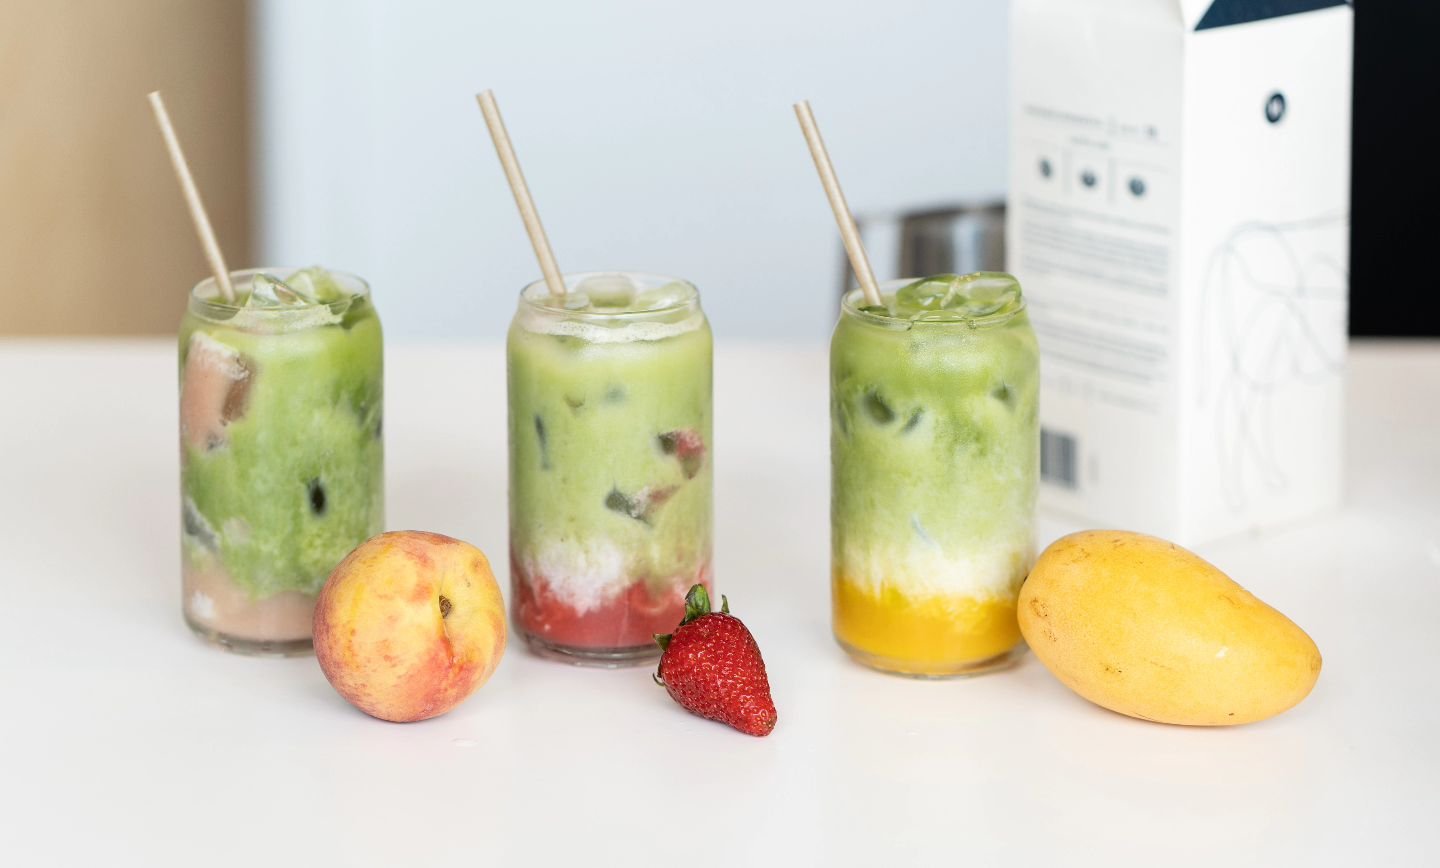 The colours of summer at Redwood. Real fruits, your favourite milk, and Matcha. Cheers to summer 🙌

Your favourite?